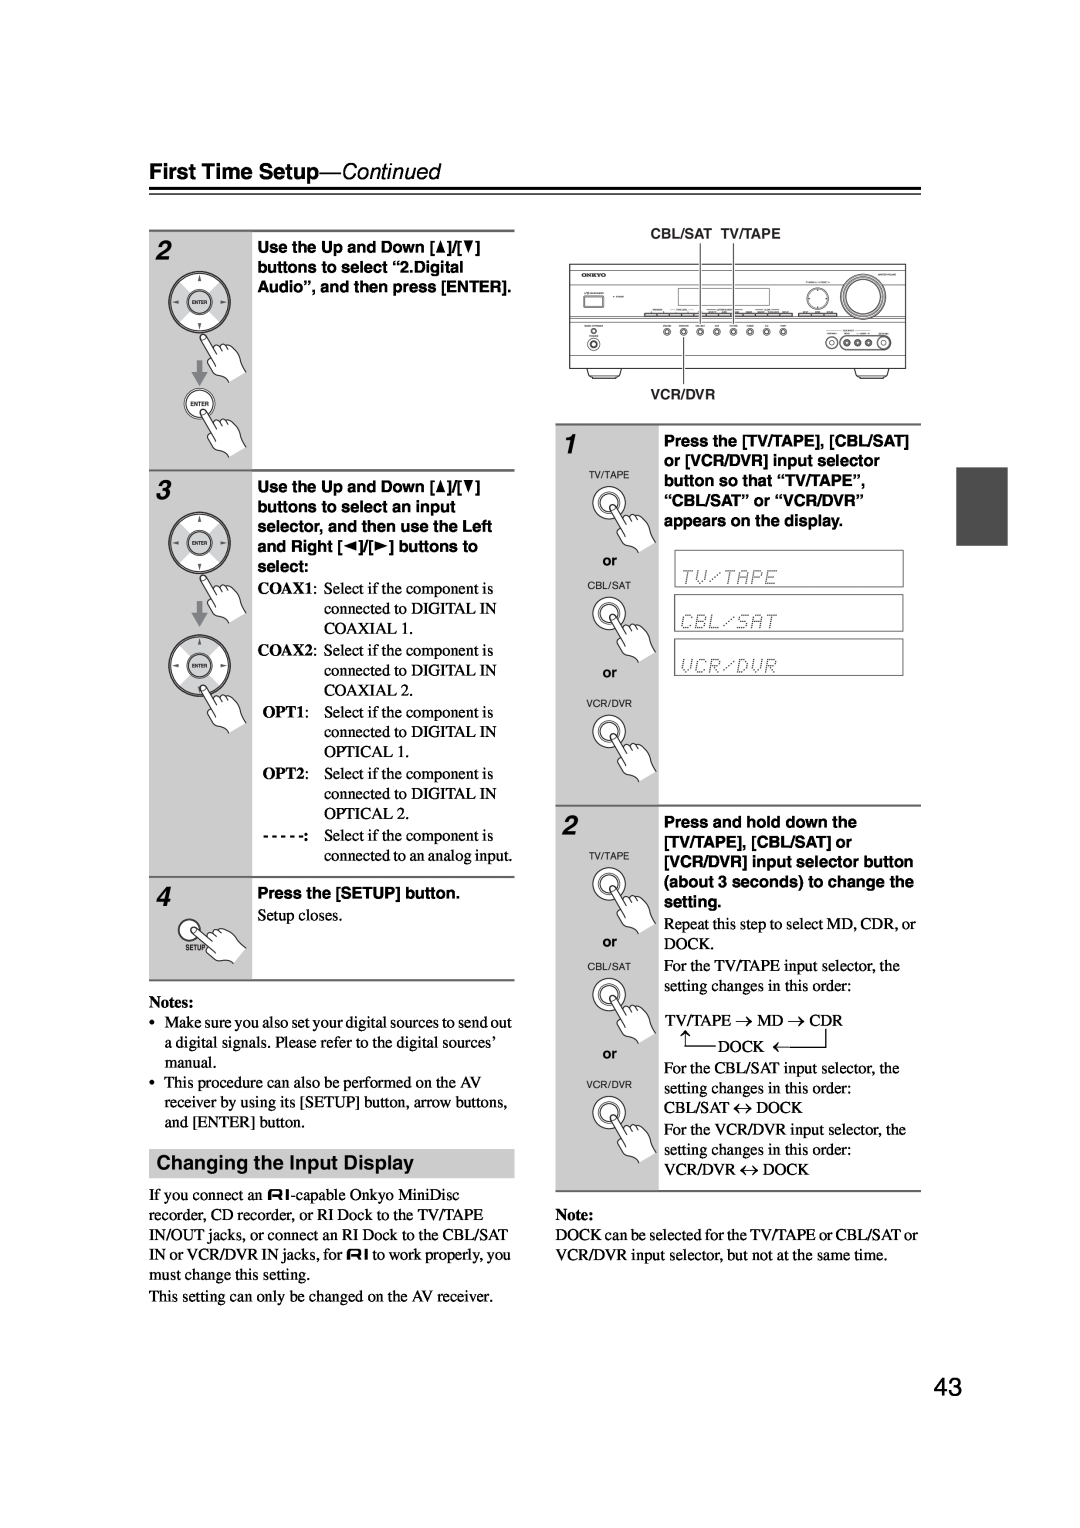 Onkyo 29344934 instruction manual Changing the Input Display, First Time Setup—Continued, OPT1, OPT2, Setup closes, Notes 